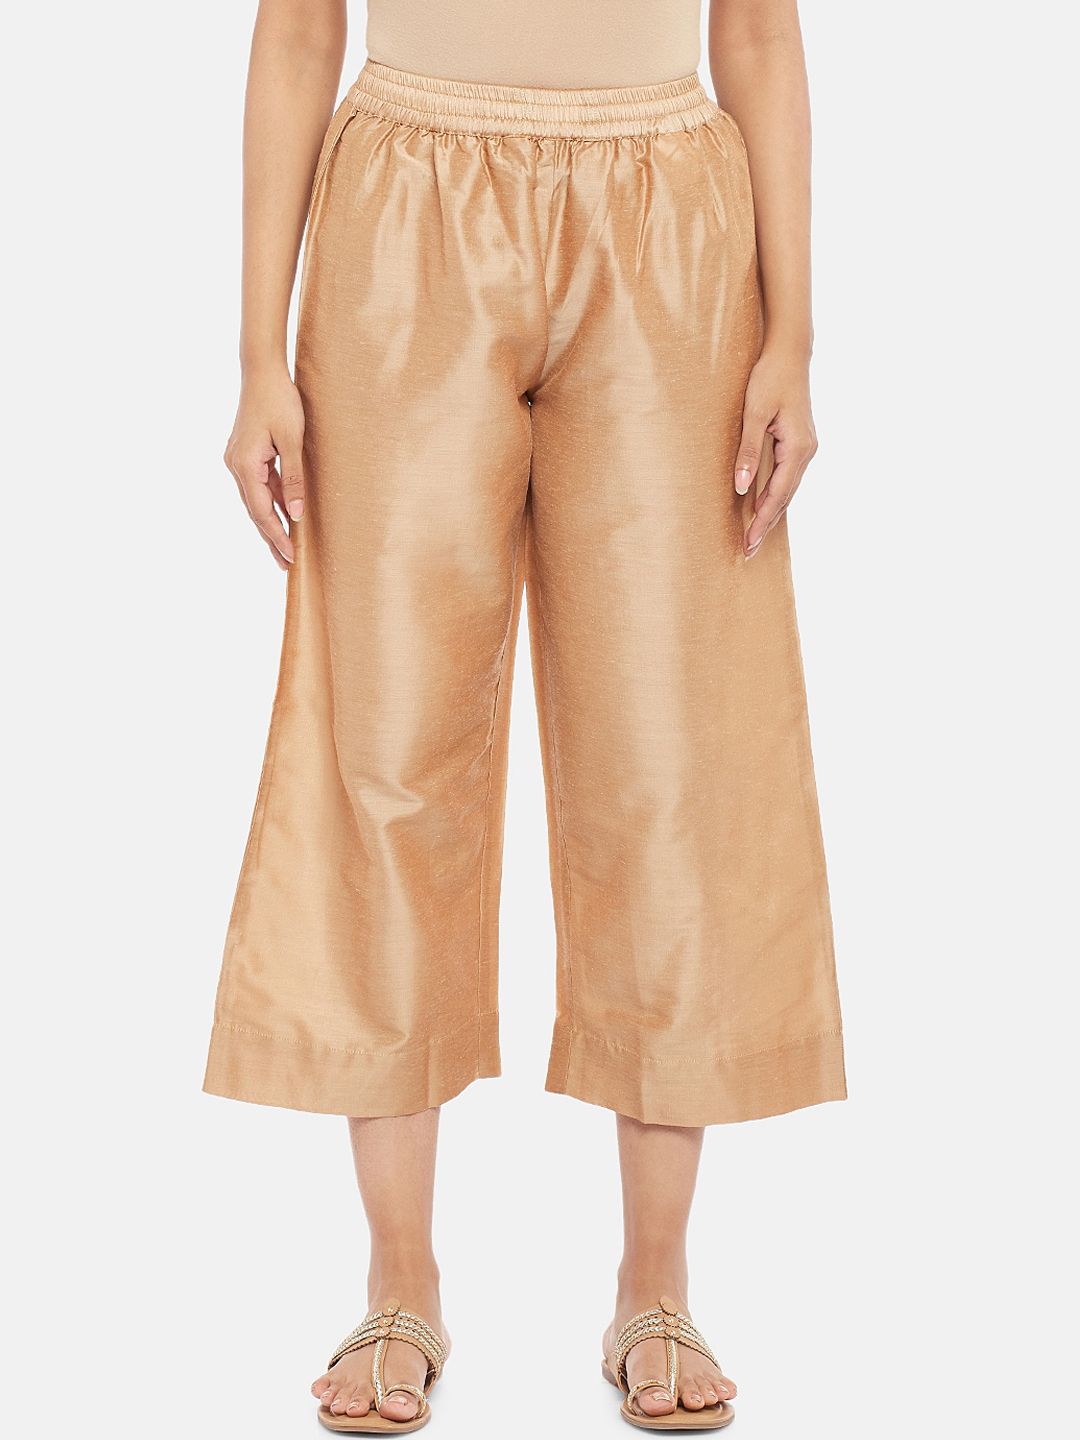 RANGMANCH BY PANTALOONS Women Gold-Toned Solid Culottes Trousers Price in India